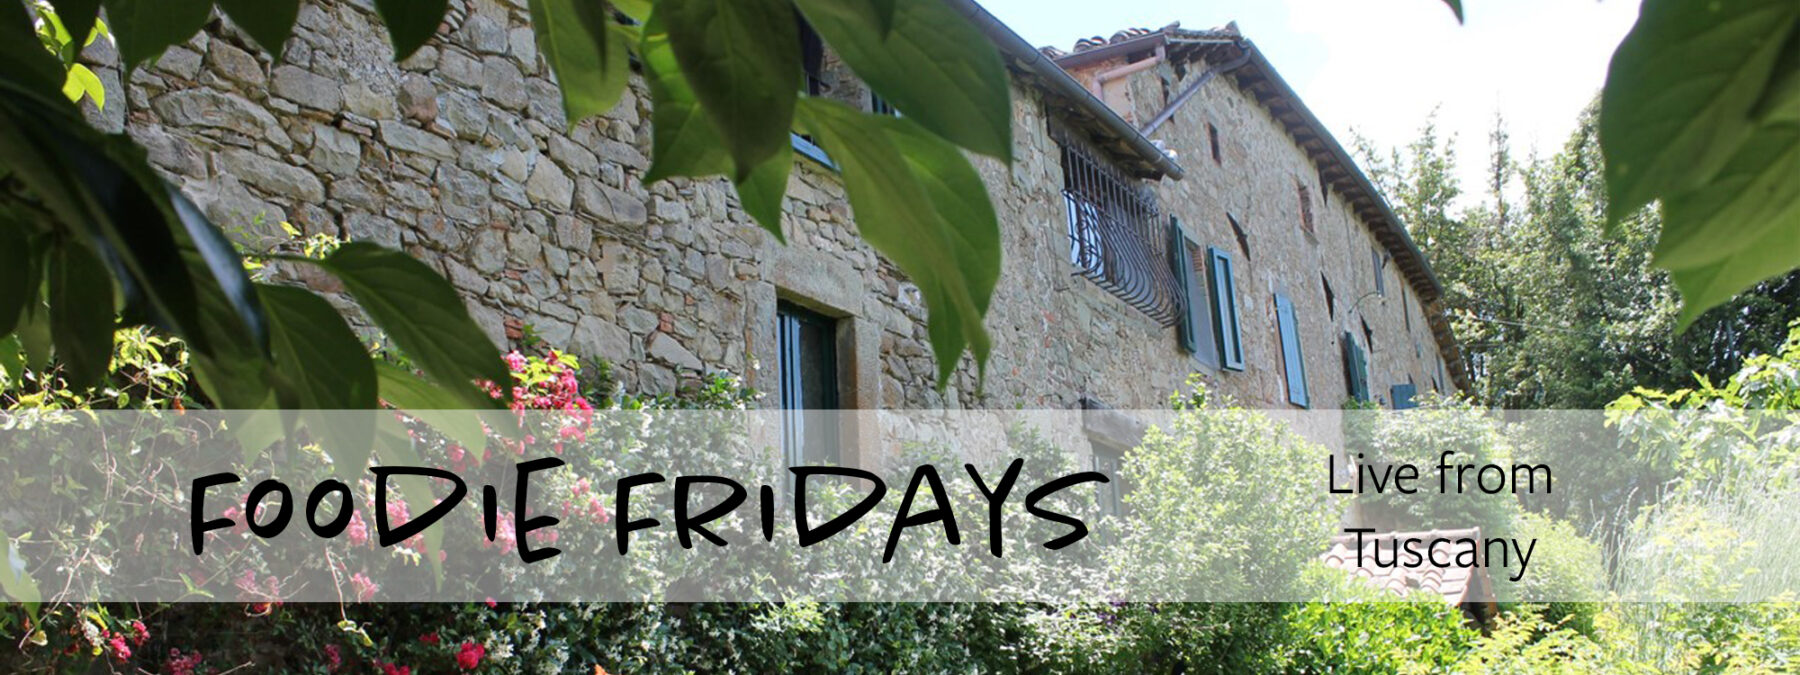 Foodie Fridays Live from Tuscany